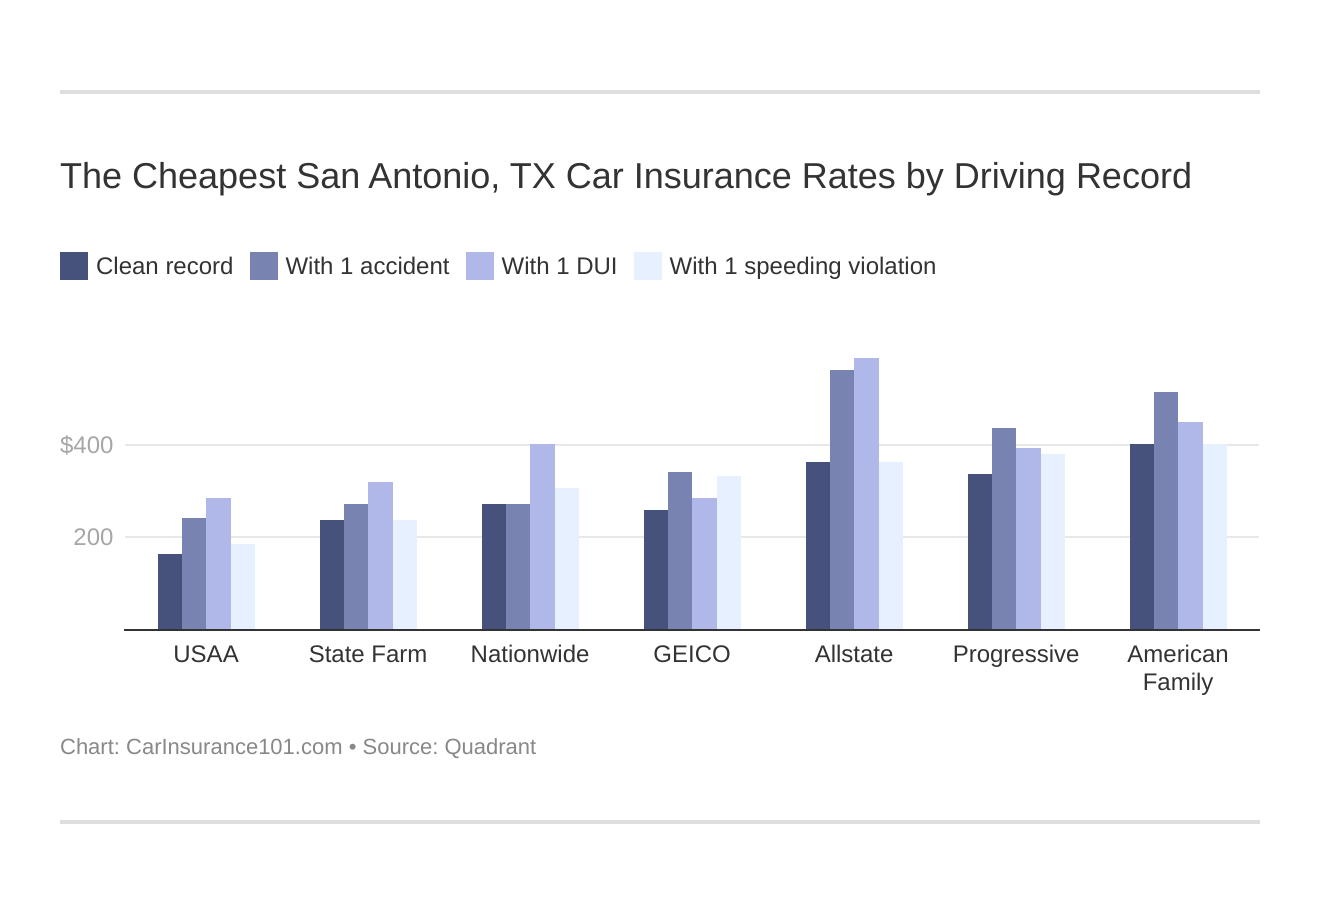 The Cheapest San Antonio, TX Car Insurance Rates by Driving Record